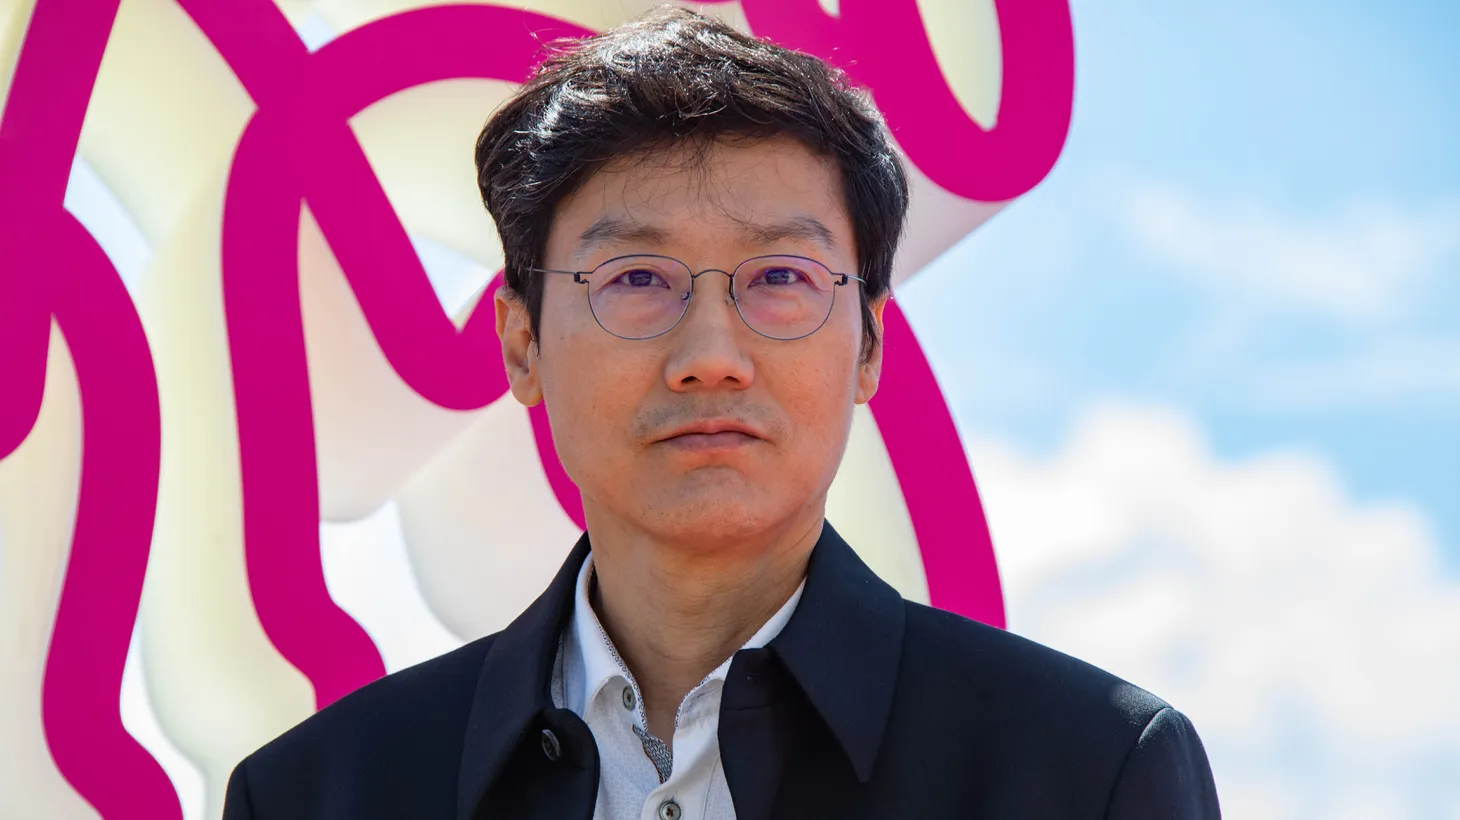 “Squid Game” creator Hwang Dong-hyuk wasn’t sure anyone would like the series. “I didn't expect everyone, all over the globe, from the 5-year-old kid to 80-year-old [to watch it],” he says.